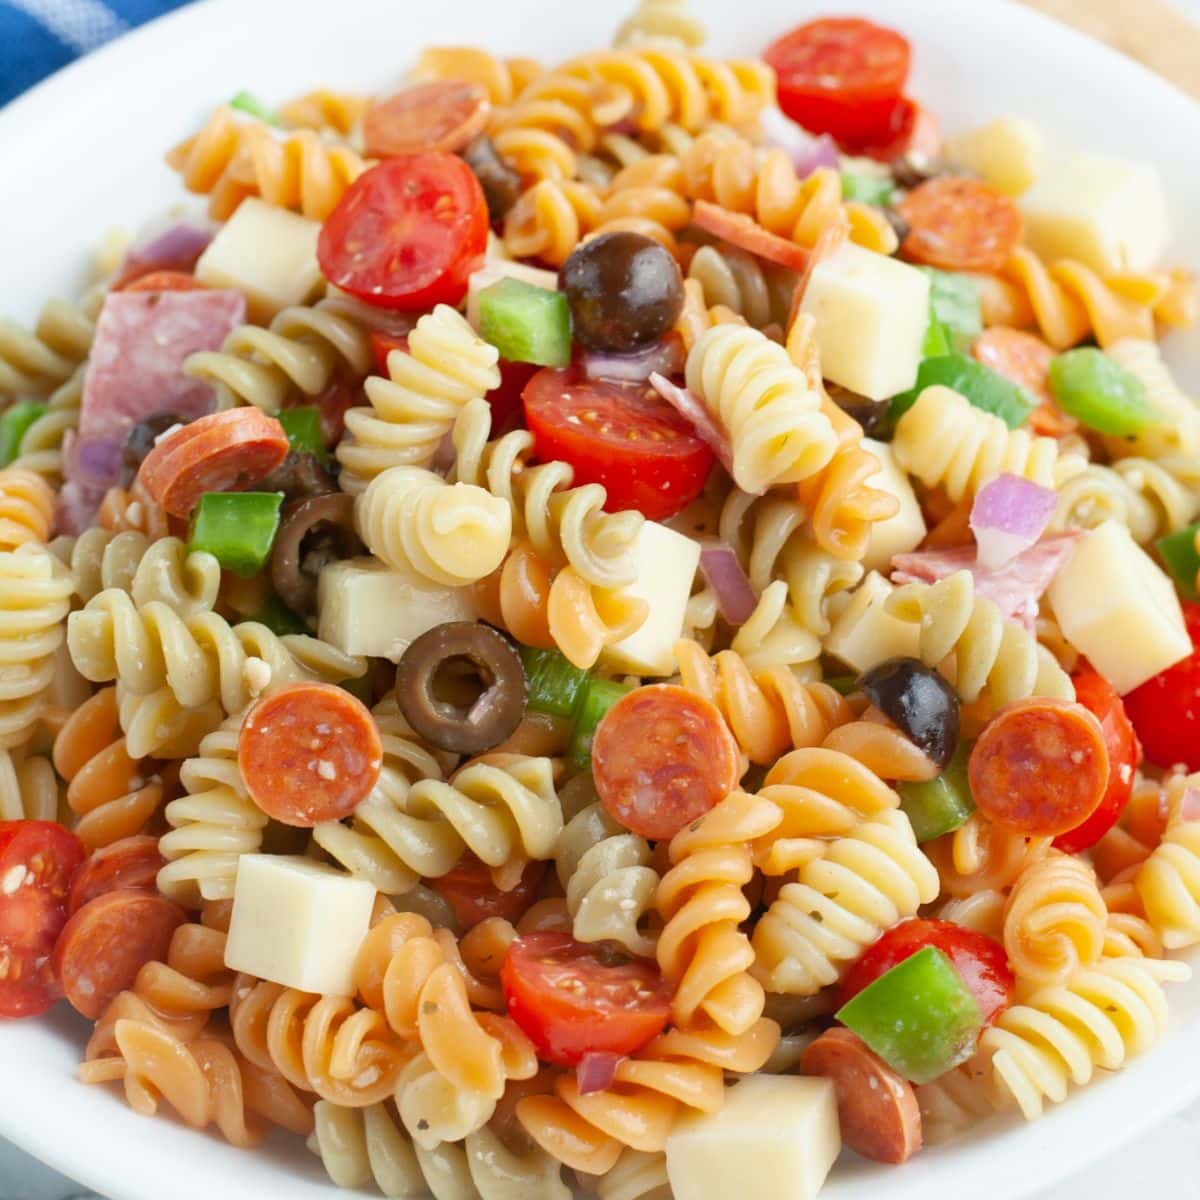 Pasta salad with pepperoni. 